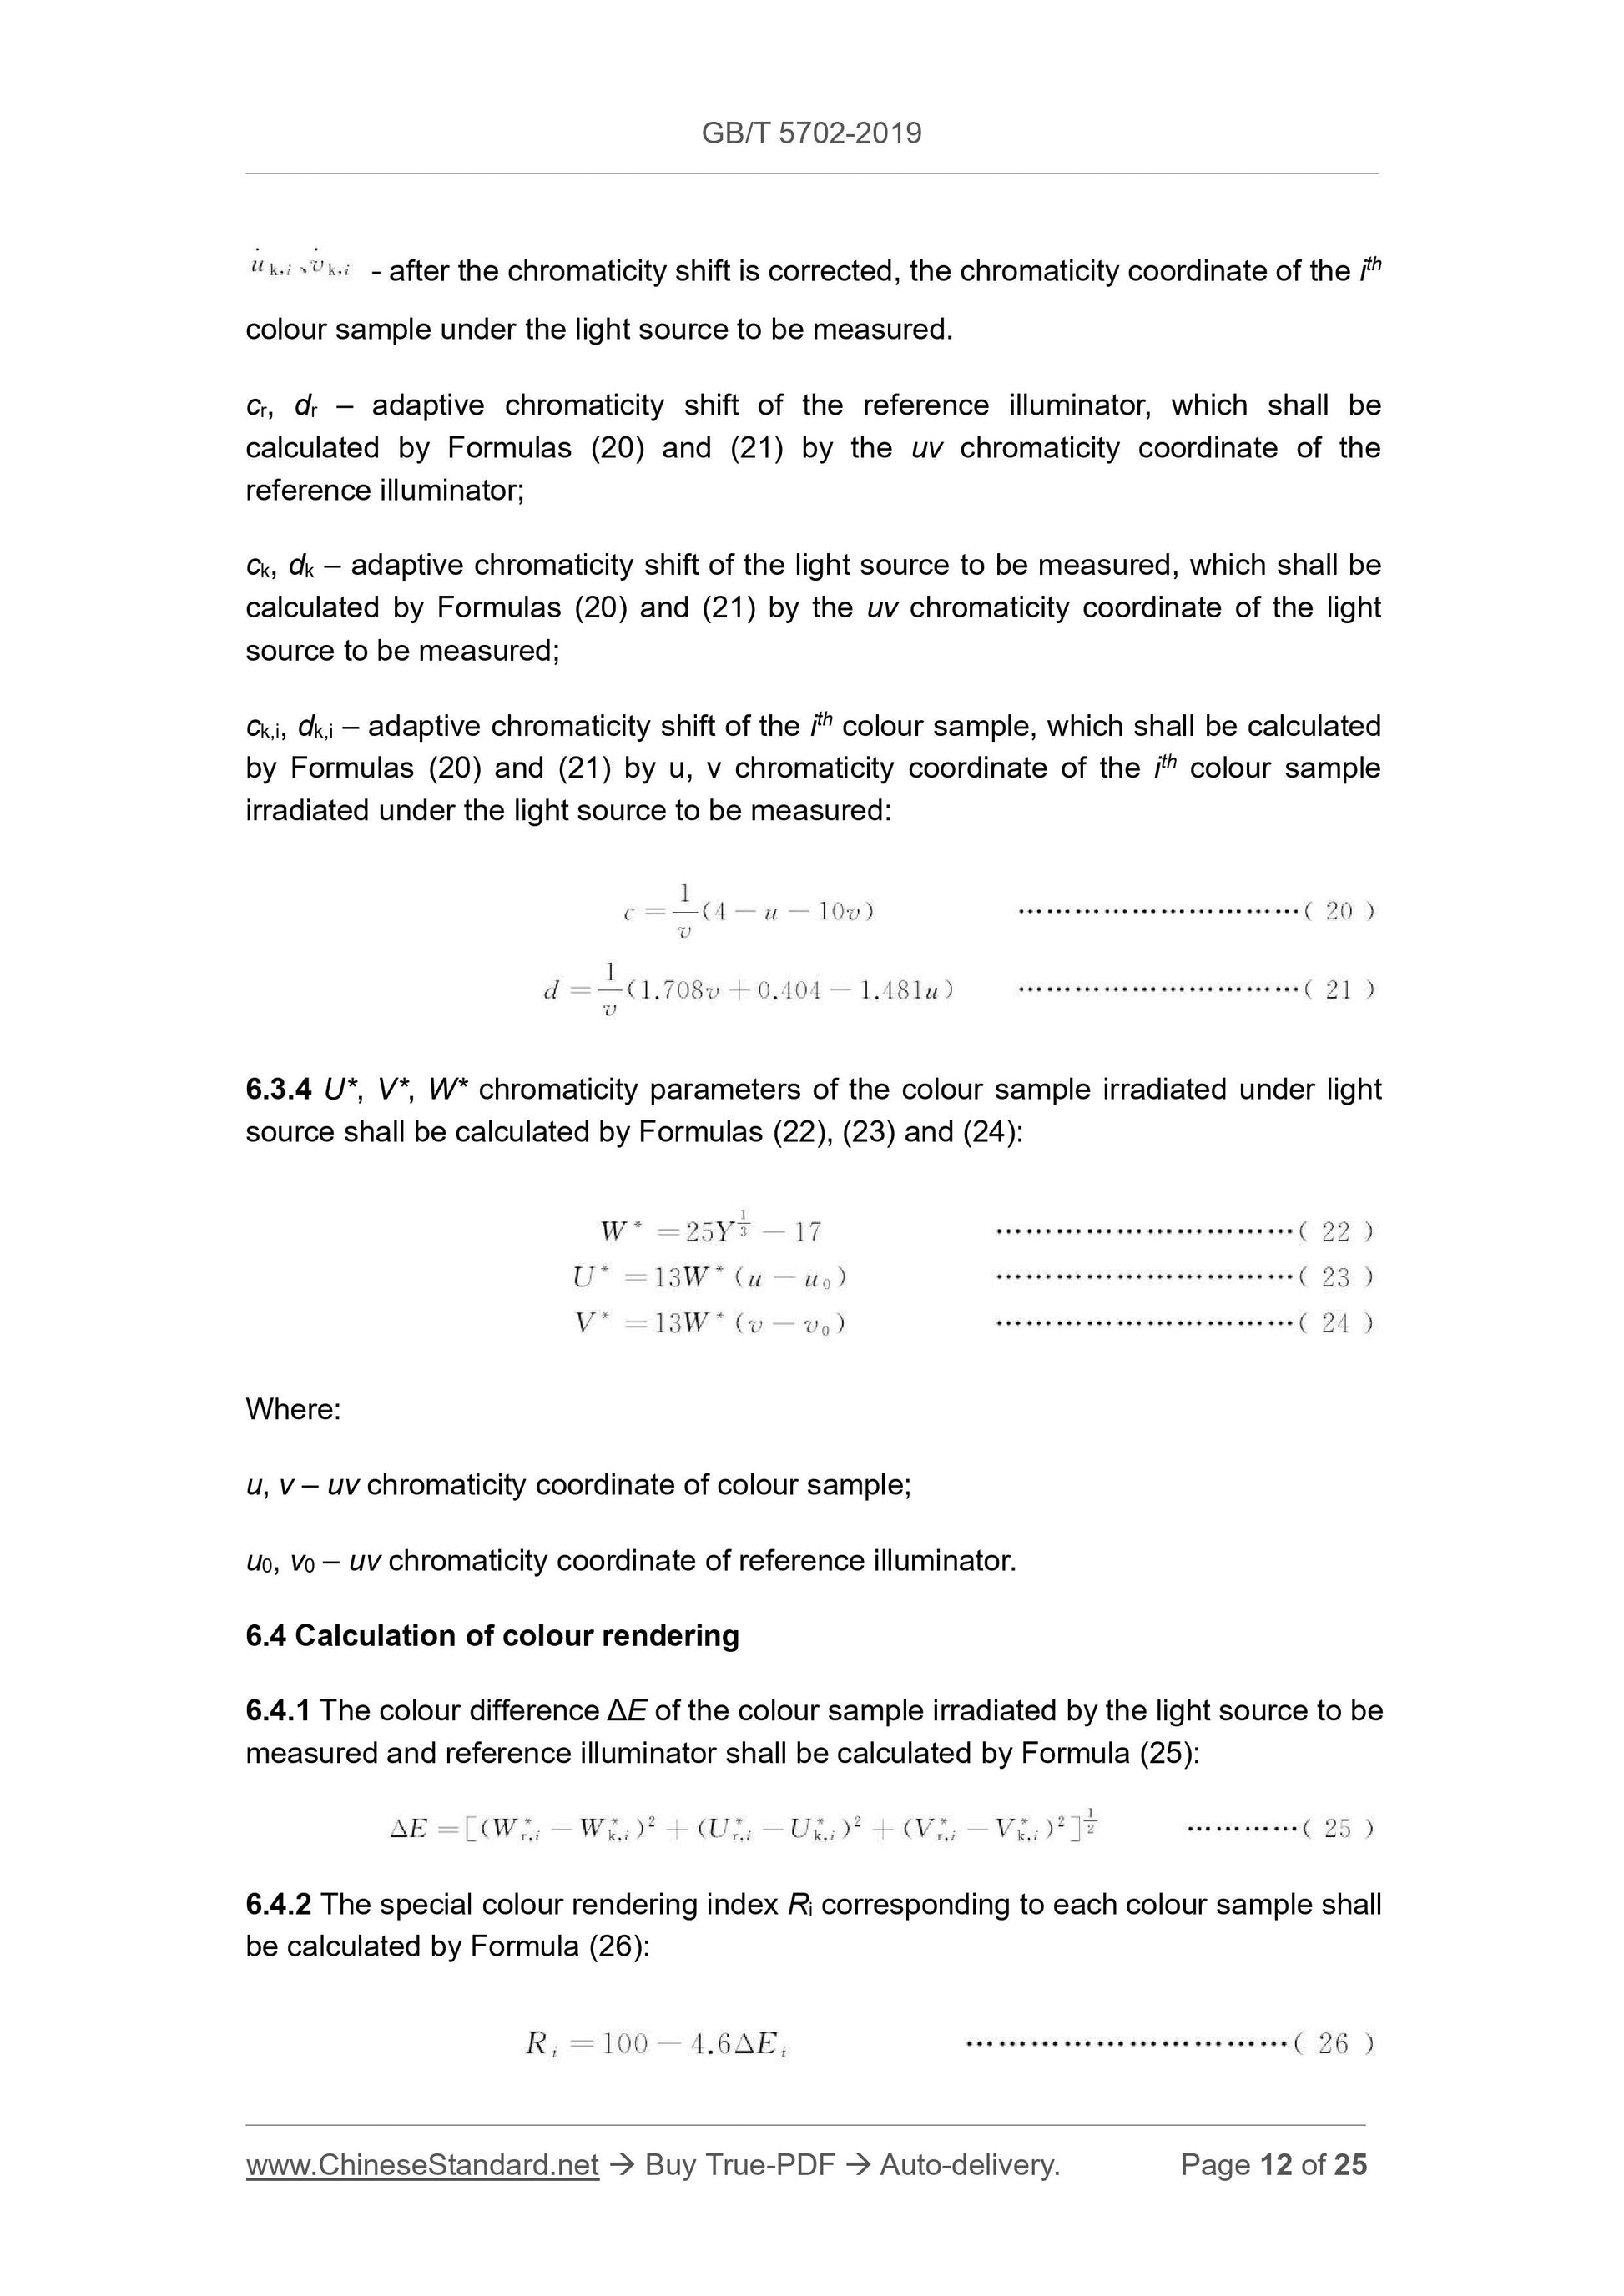 GB/T 5702-2019 Page 5